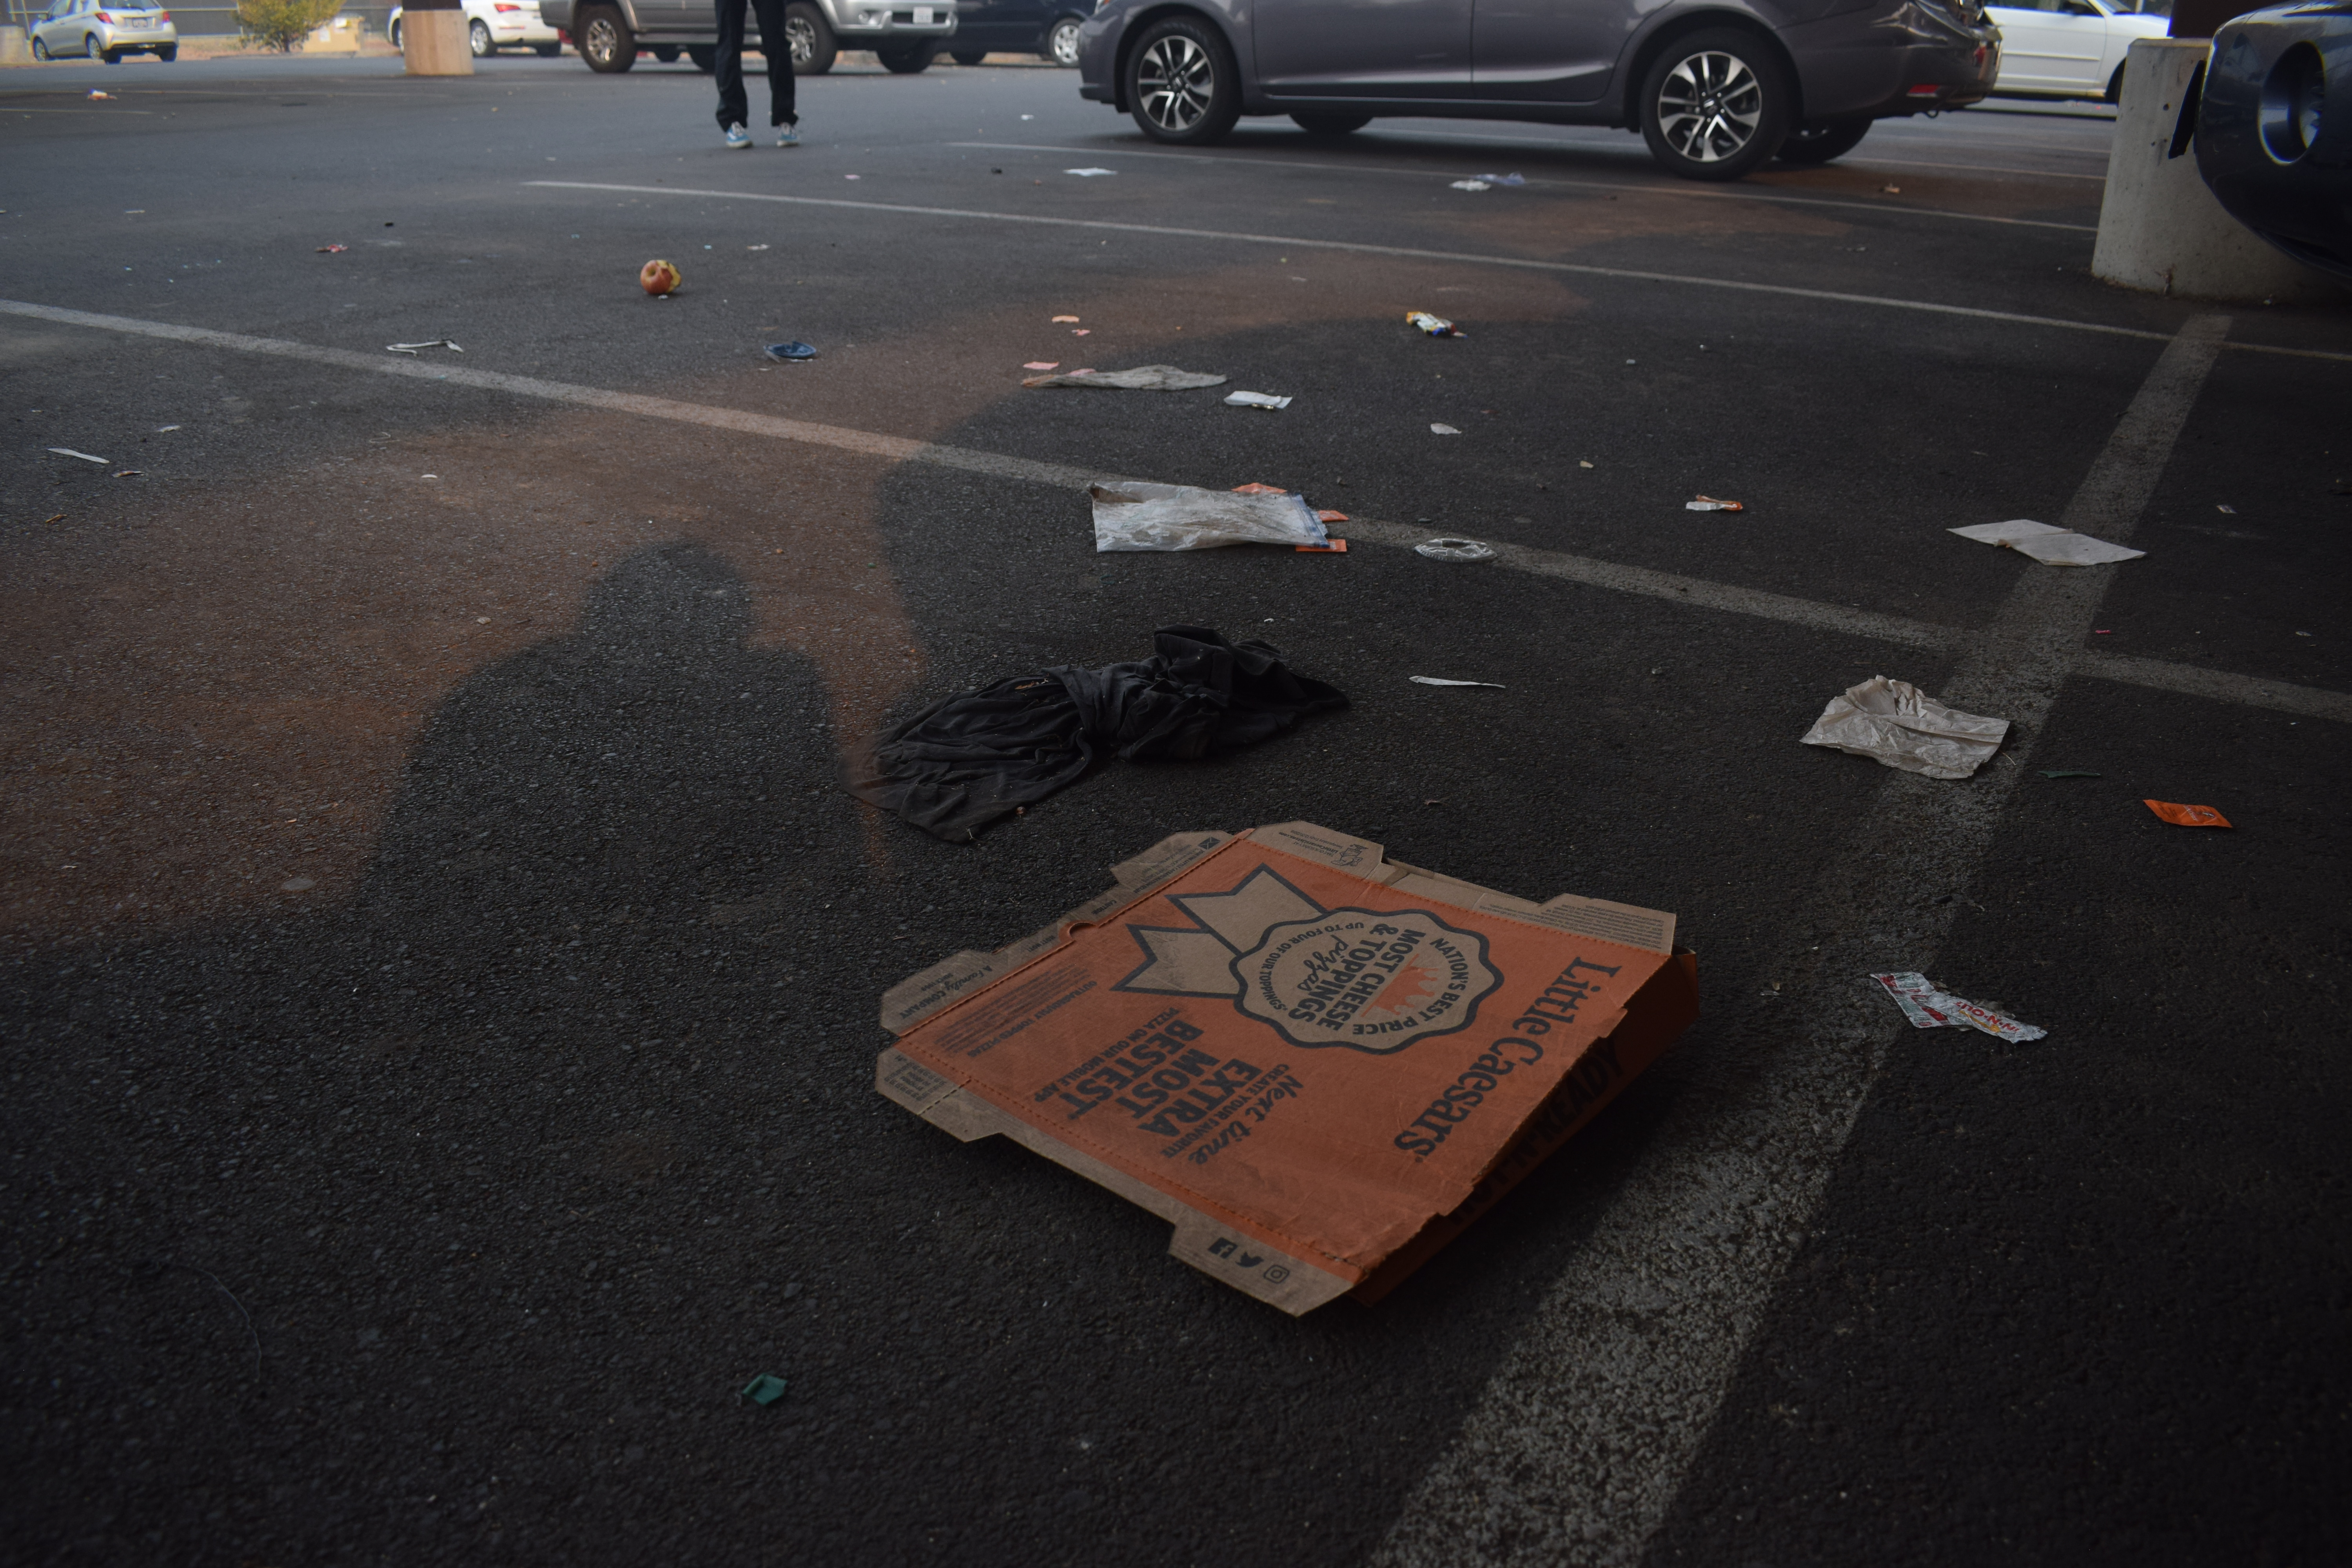 A run-over Little Caesars Pizza box rests in the middle of the parking lot.